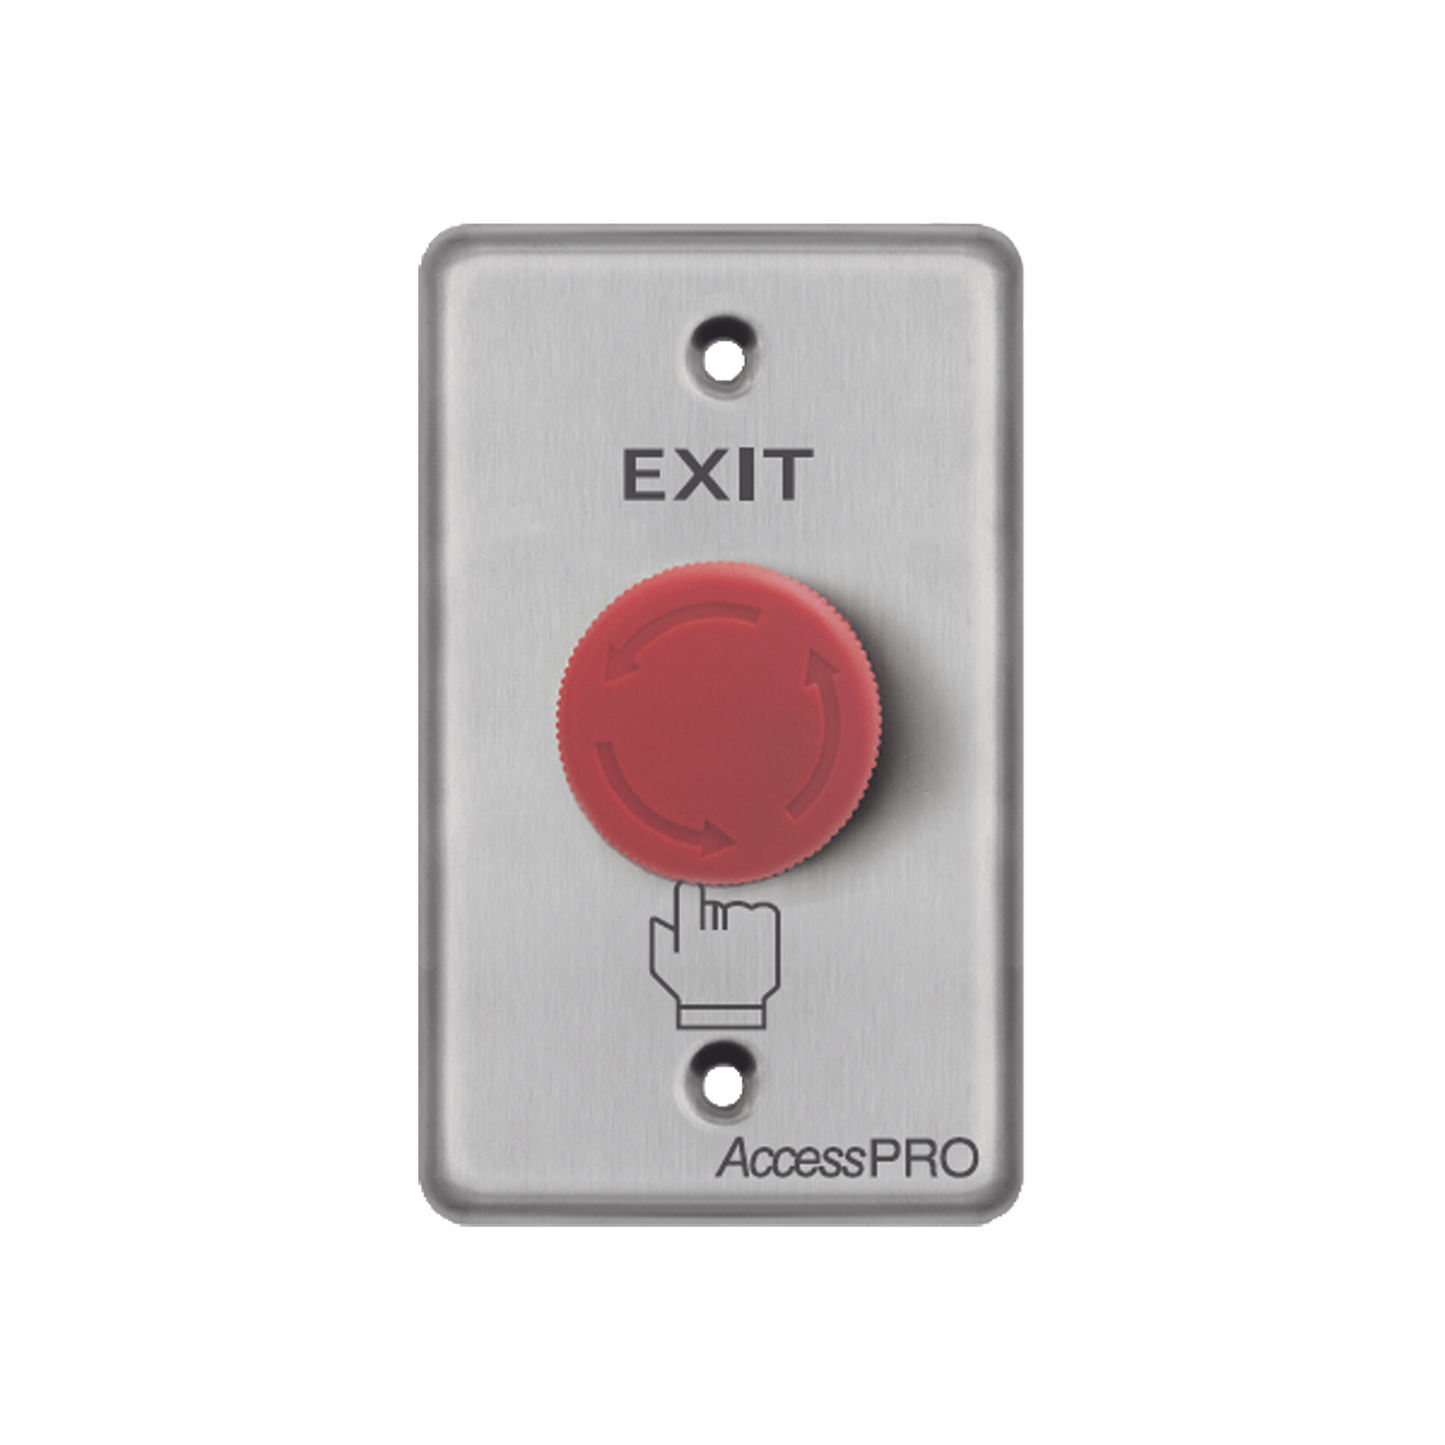 Emergency Red Exit Button or Stop Button